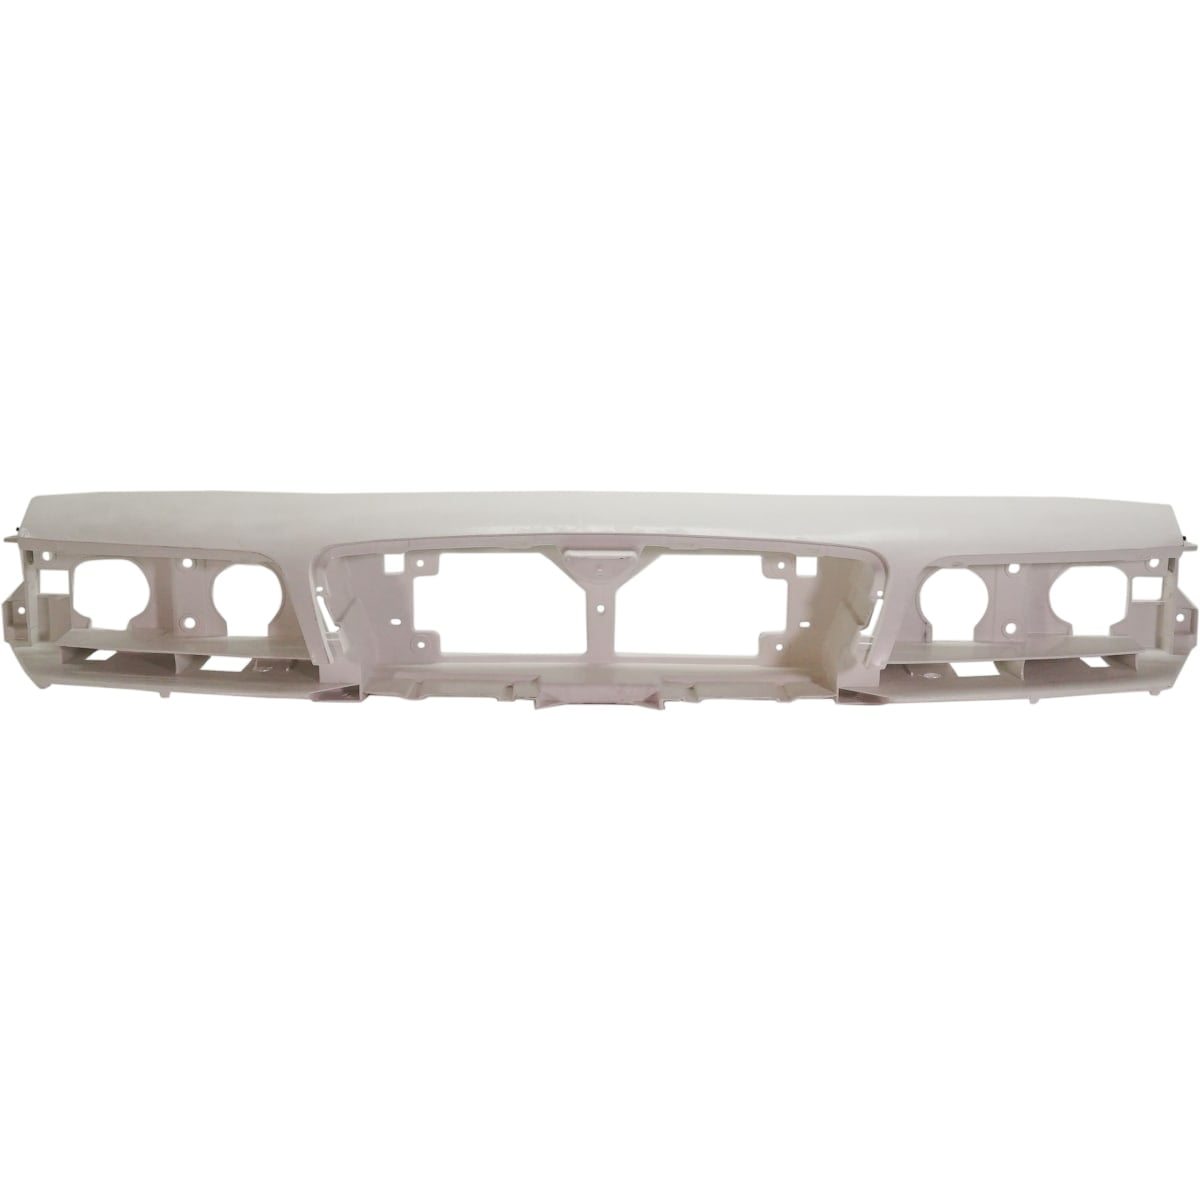 Header Panel Compatible with Mercury Grand Marquis 06-11 CAPA Certified 